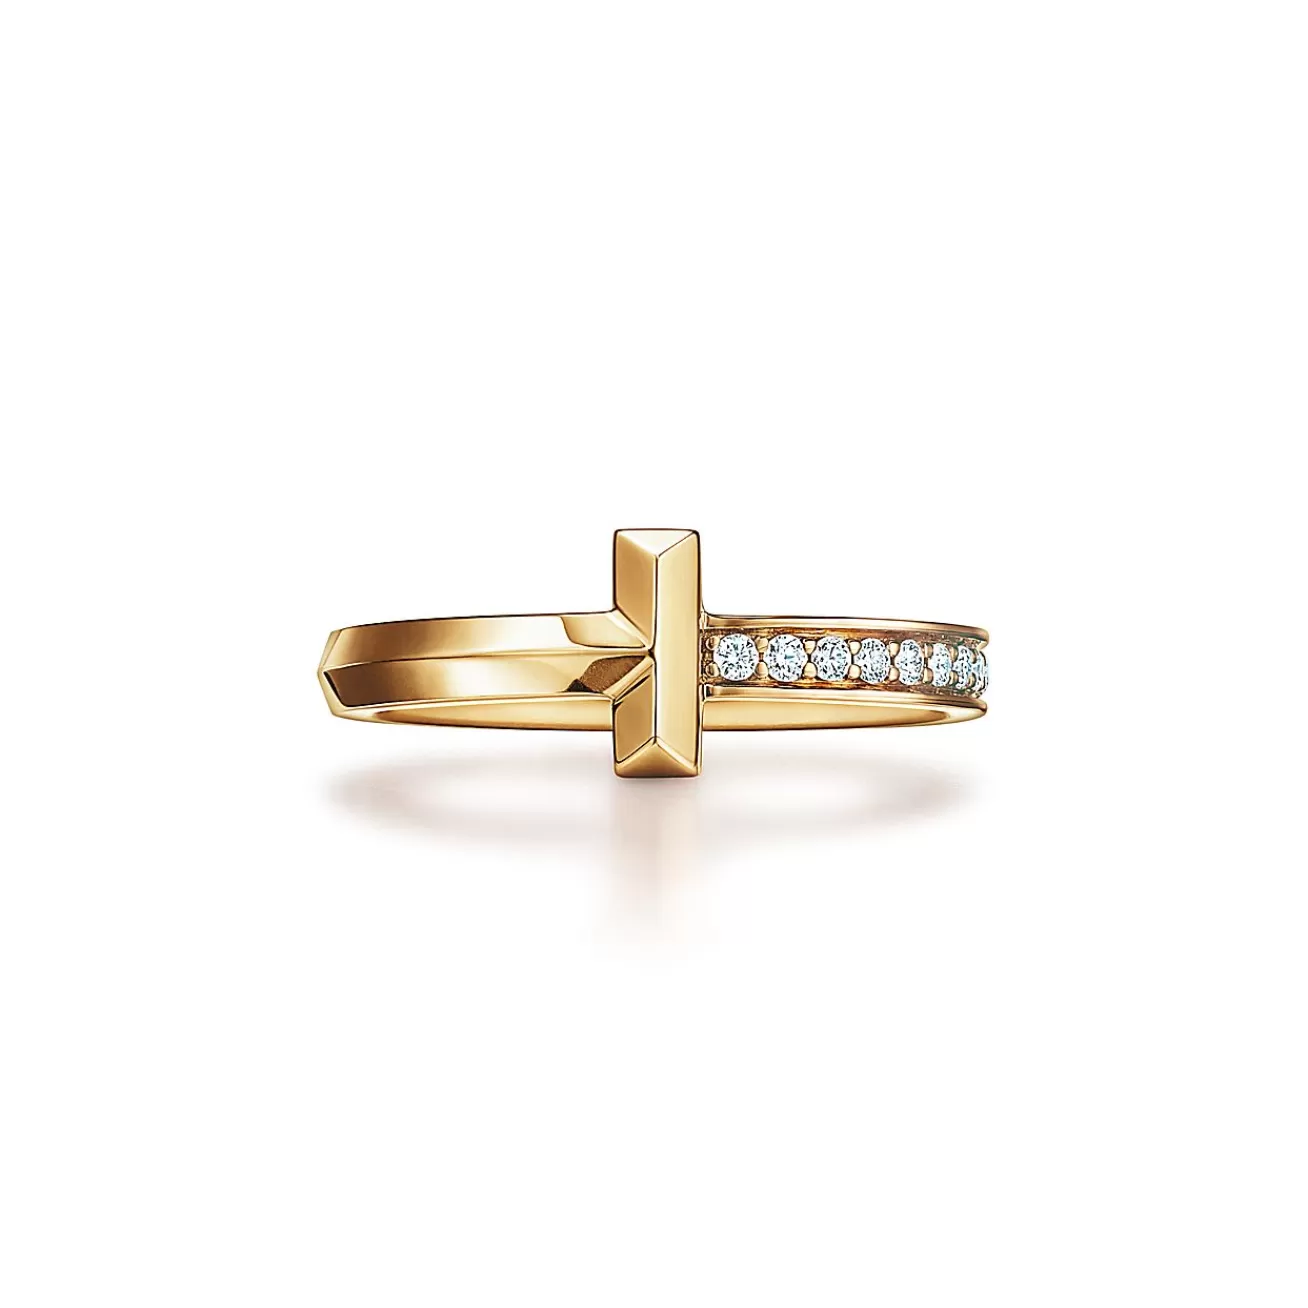 Tiffany & Co. Tiffany T T1 Ring in Yellow Gold with Diamonds, 2.5 mm Wide | ^ Rings | Men's Jewelry